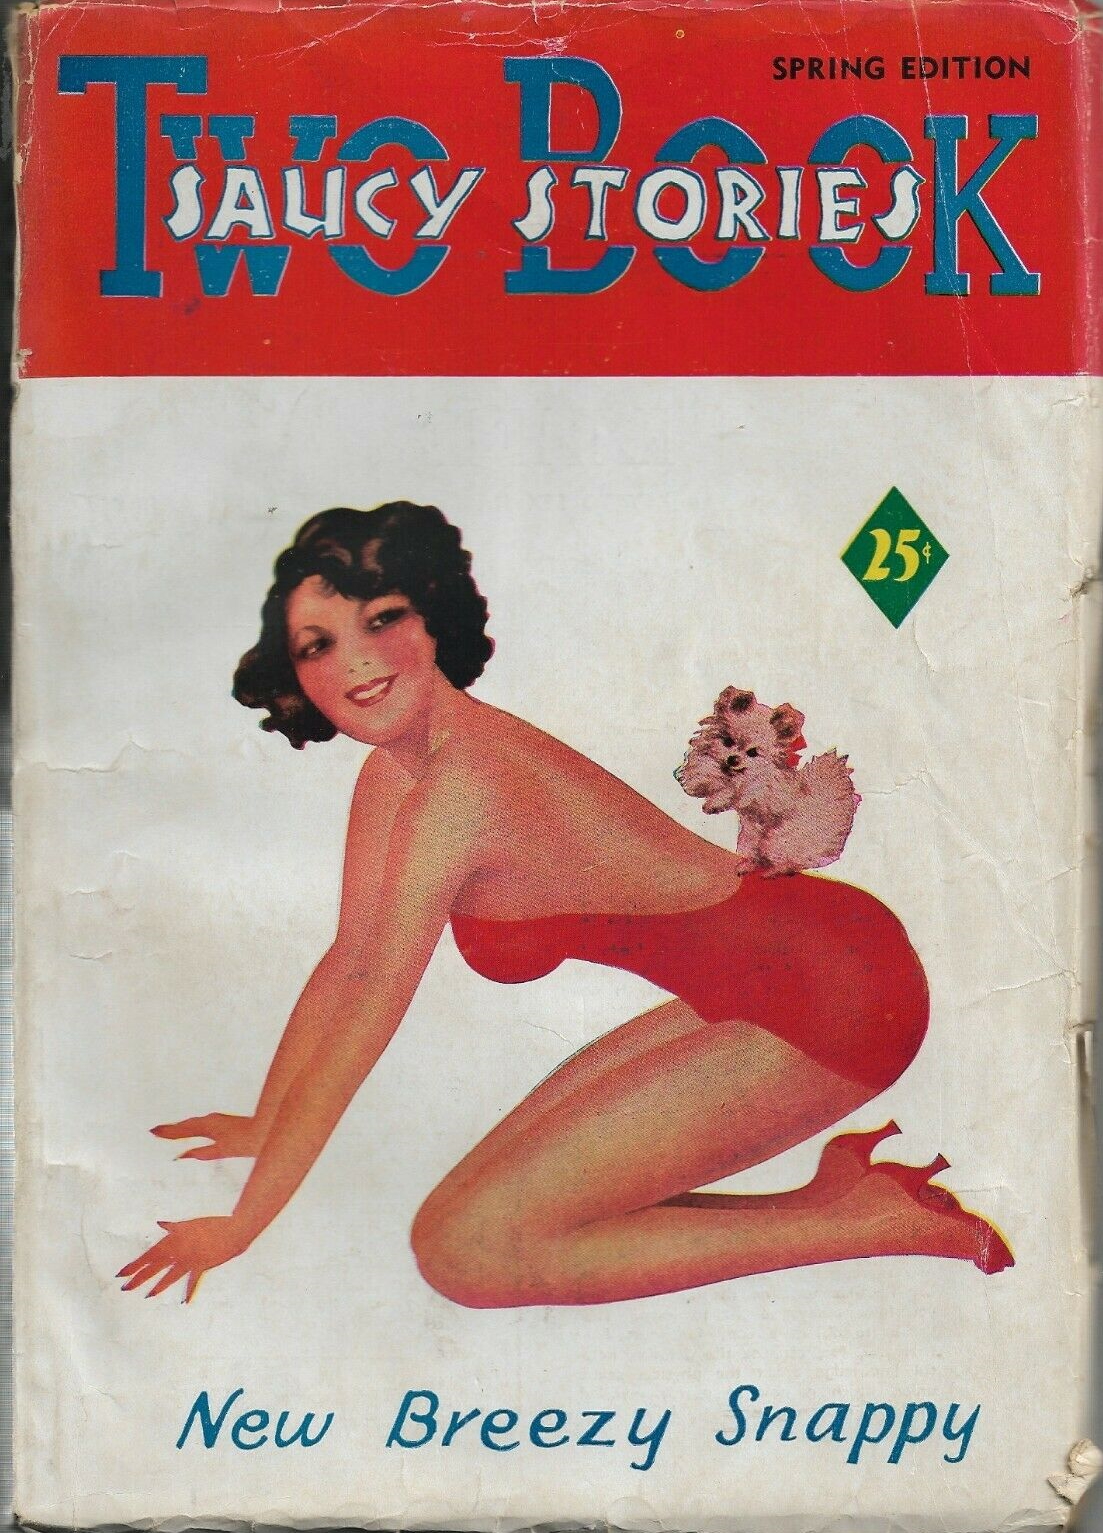 Two Book Saucy Stories - Spring 1938